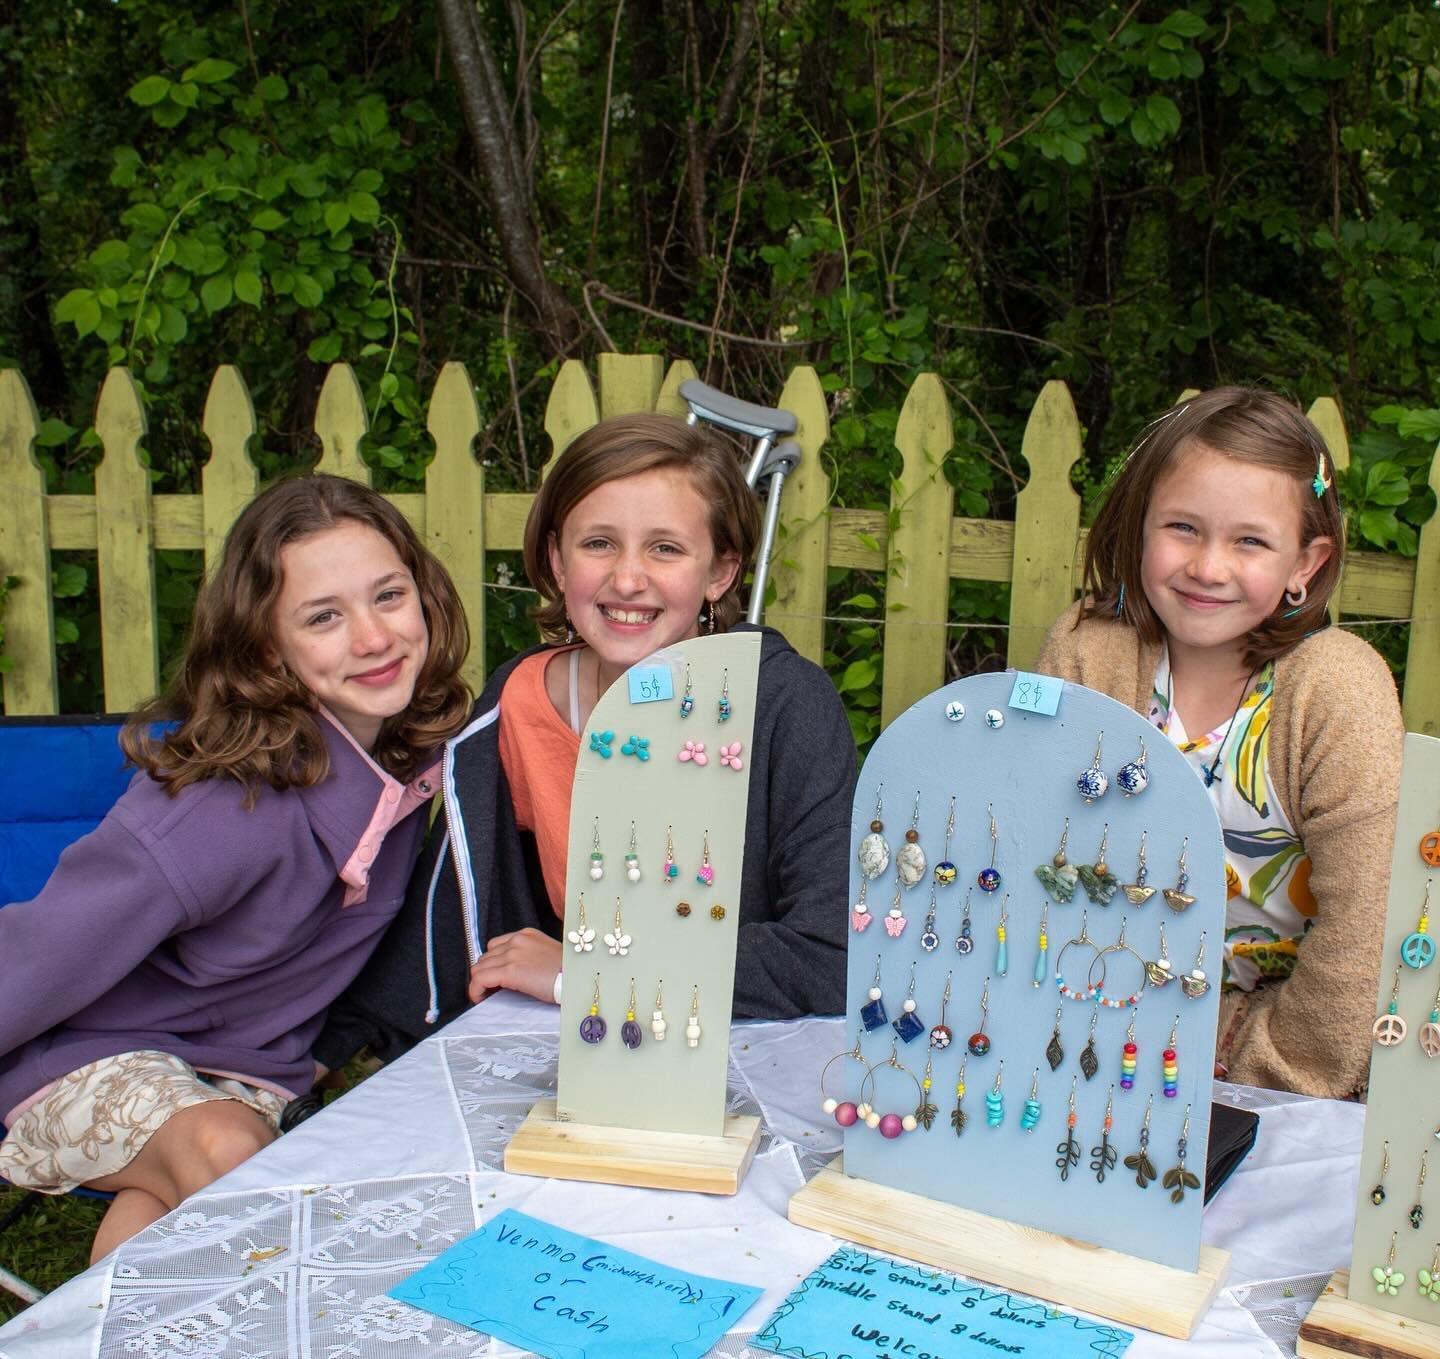 📣Calling all young makers! Youth Makers&rsquo; Market this Saturday, May 11th!🖍️

⁉️Have the kids been extra productive in the crafting corner lately? Does your child have some talent that&rsquo;s ready to be shared? Looking for a super fun hands-o